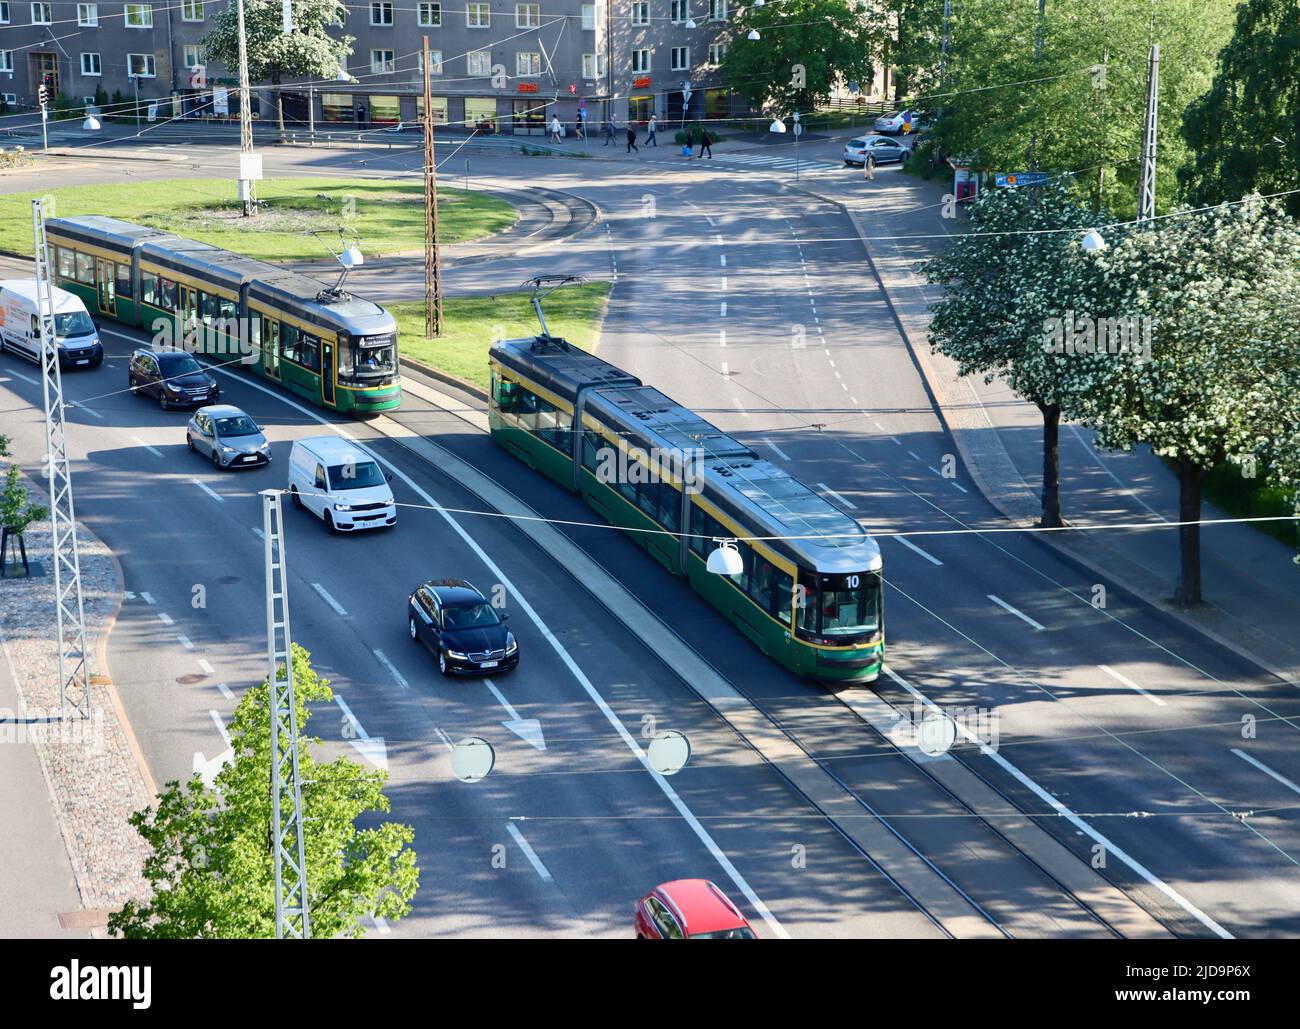 Yellow and green Helsinki trams, Finland June 2022 Stock Photo